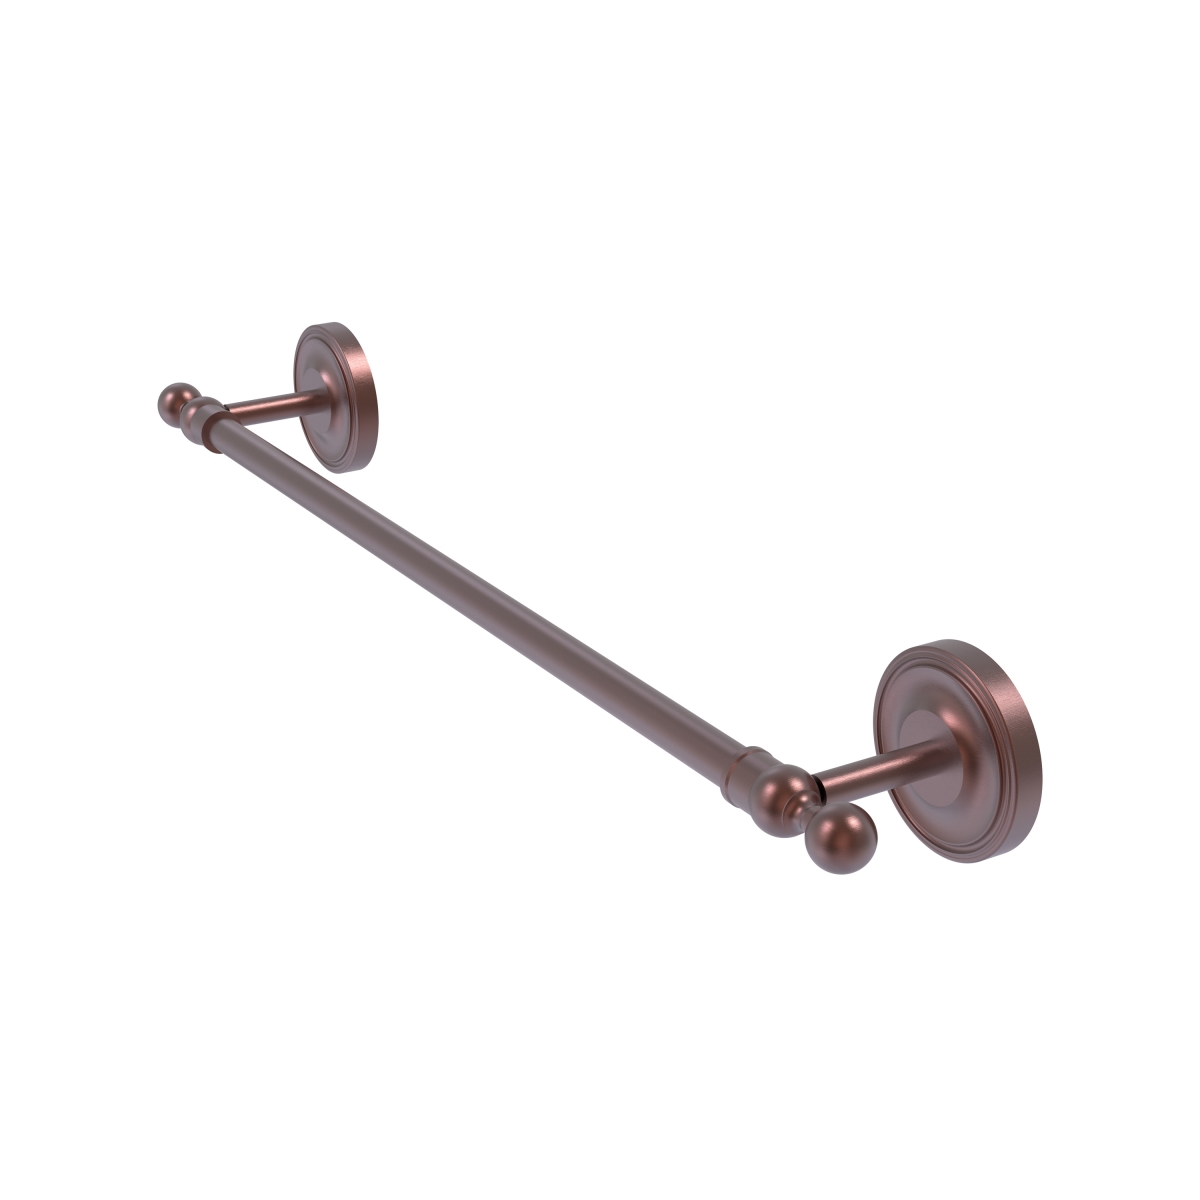 Allied Brass R-41-36-CA 36 in. Regal Collection Towel Bar, Antique Copper - 3 x 39 x 36 in.